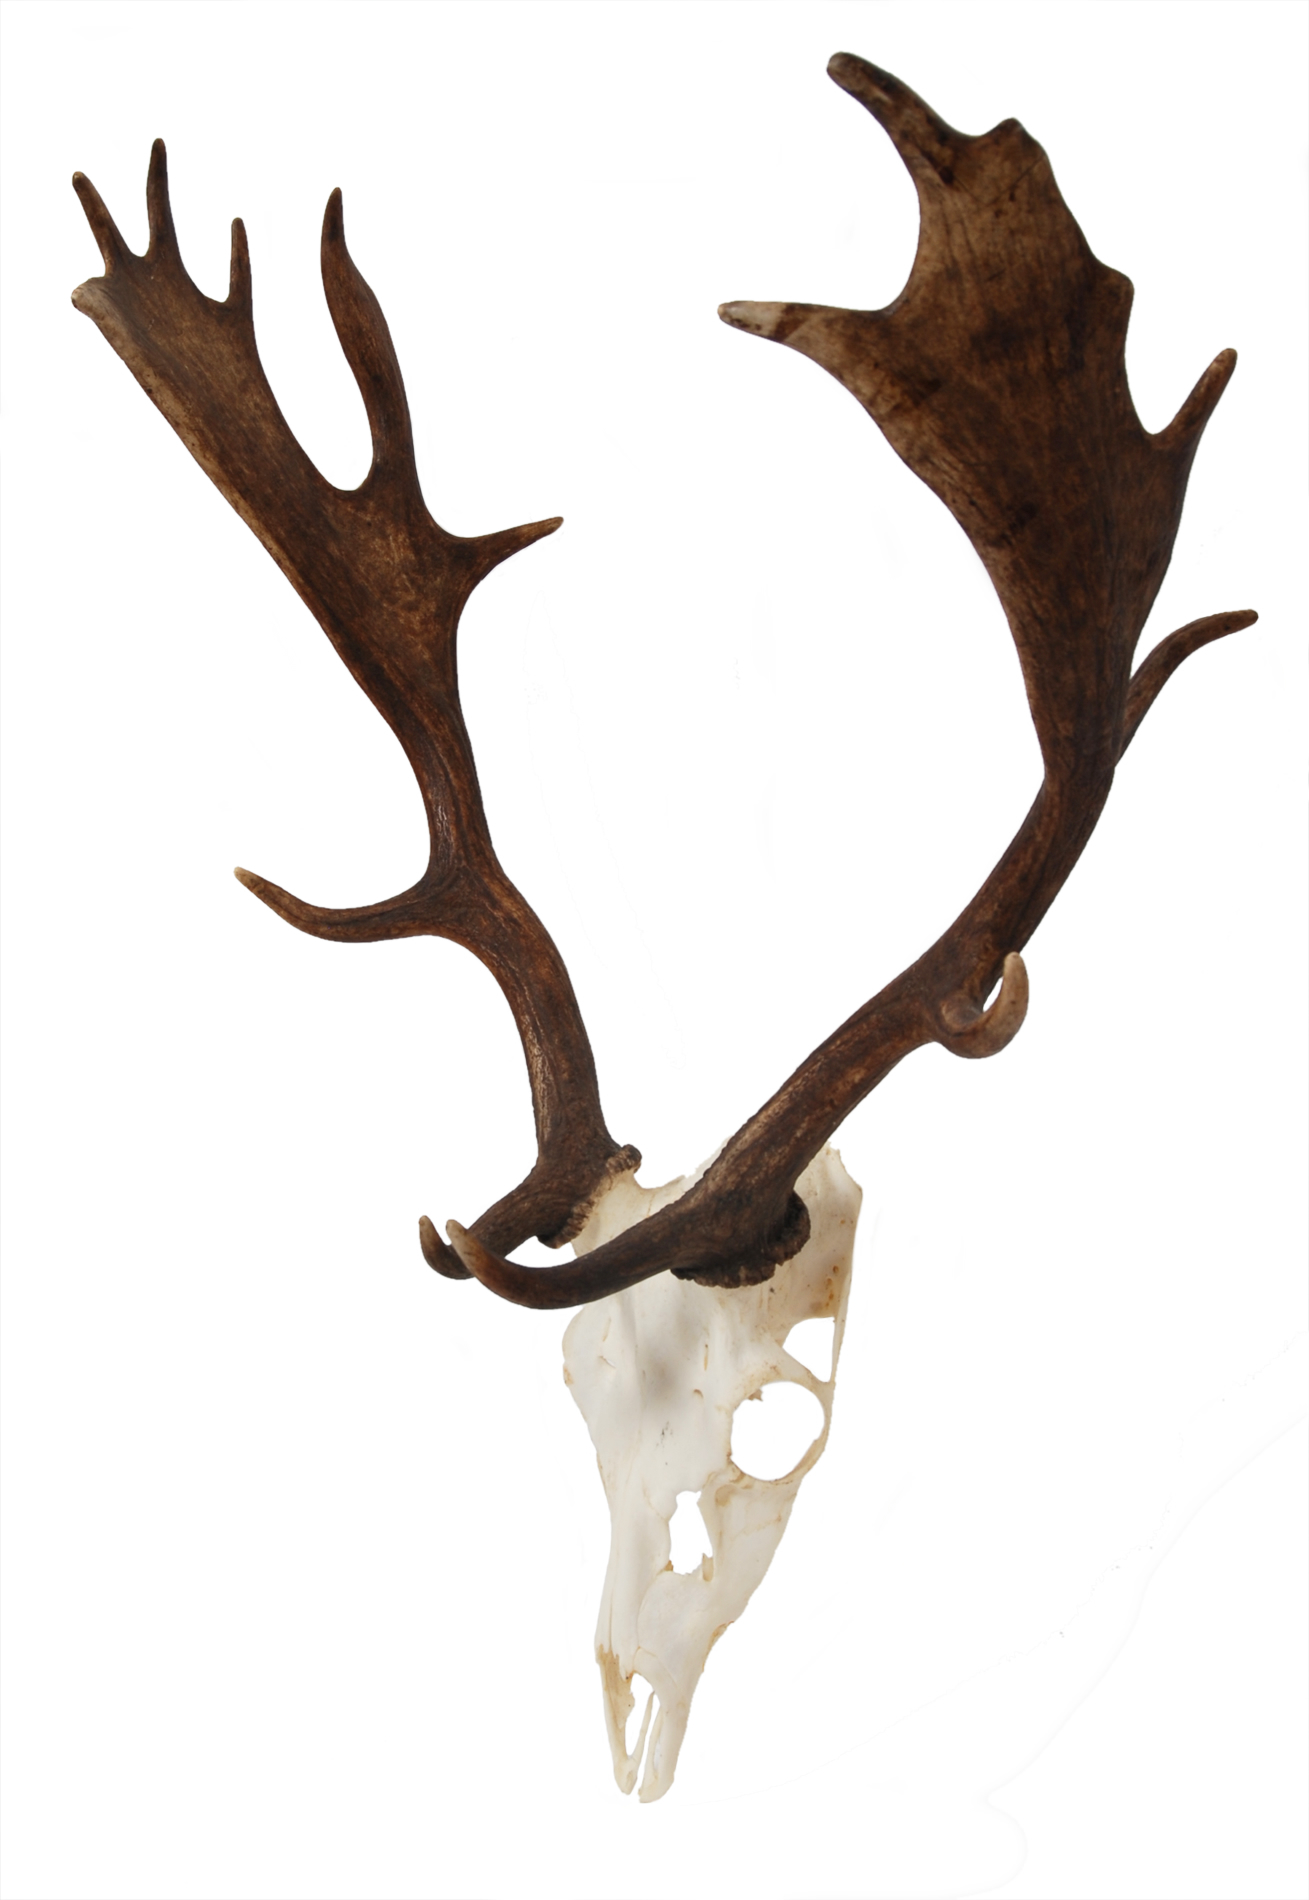 Stag Antlers, Rams Skulls and Trophies Here